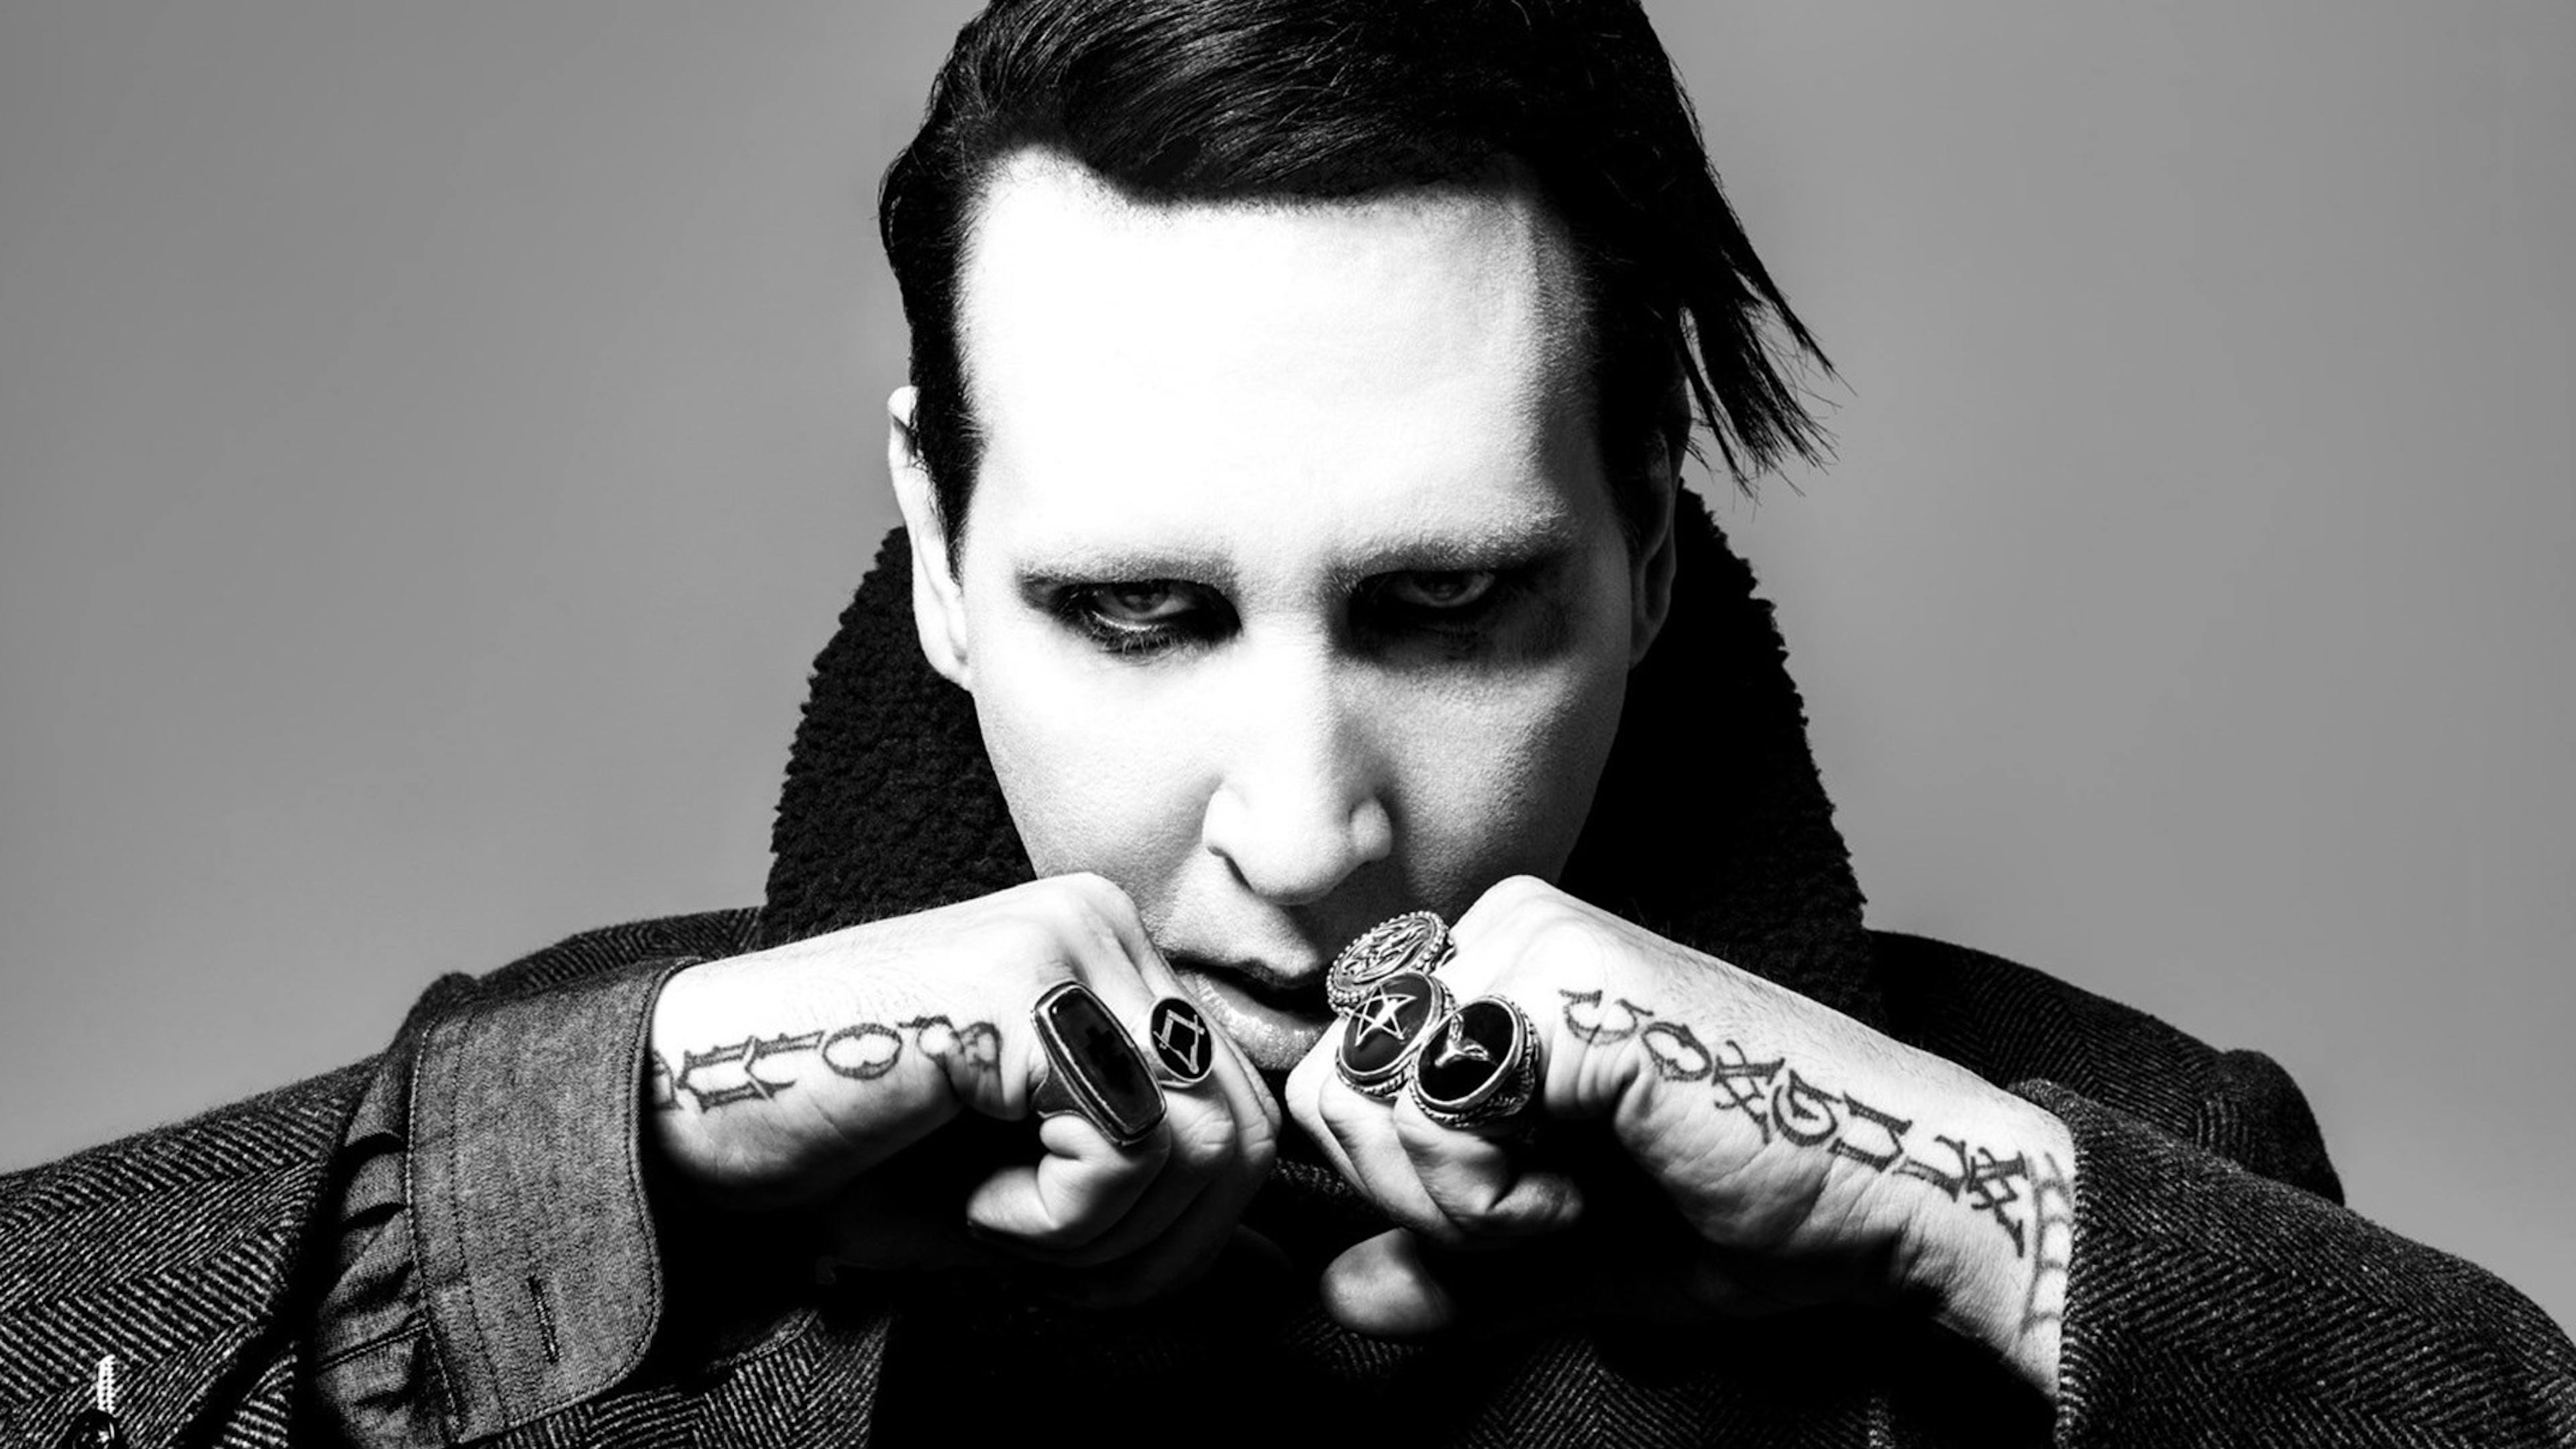 Marilyn Manson responds to abuse allegations; U.S. record label severs ties